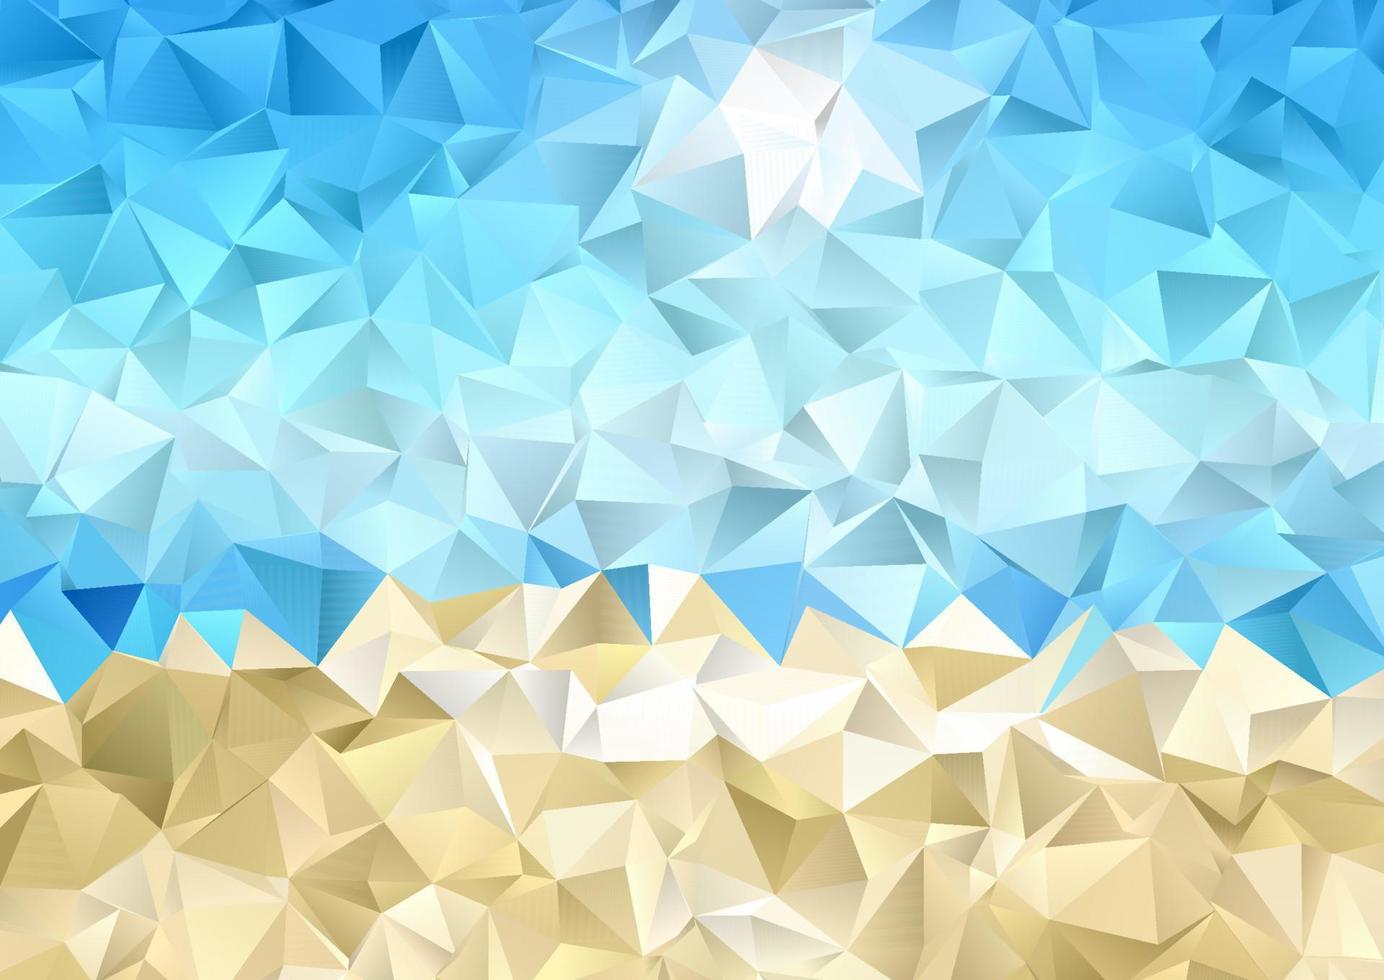 beach themed low poly background design vector